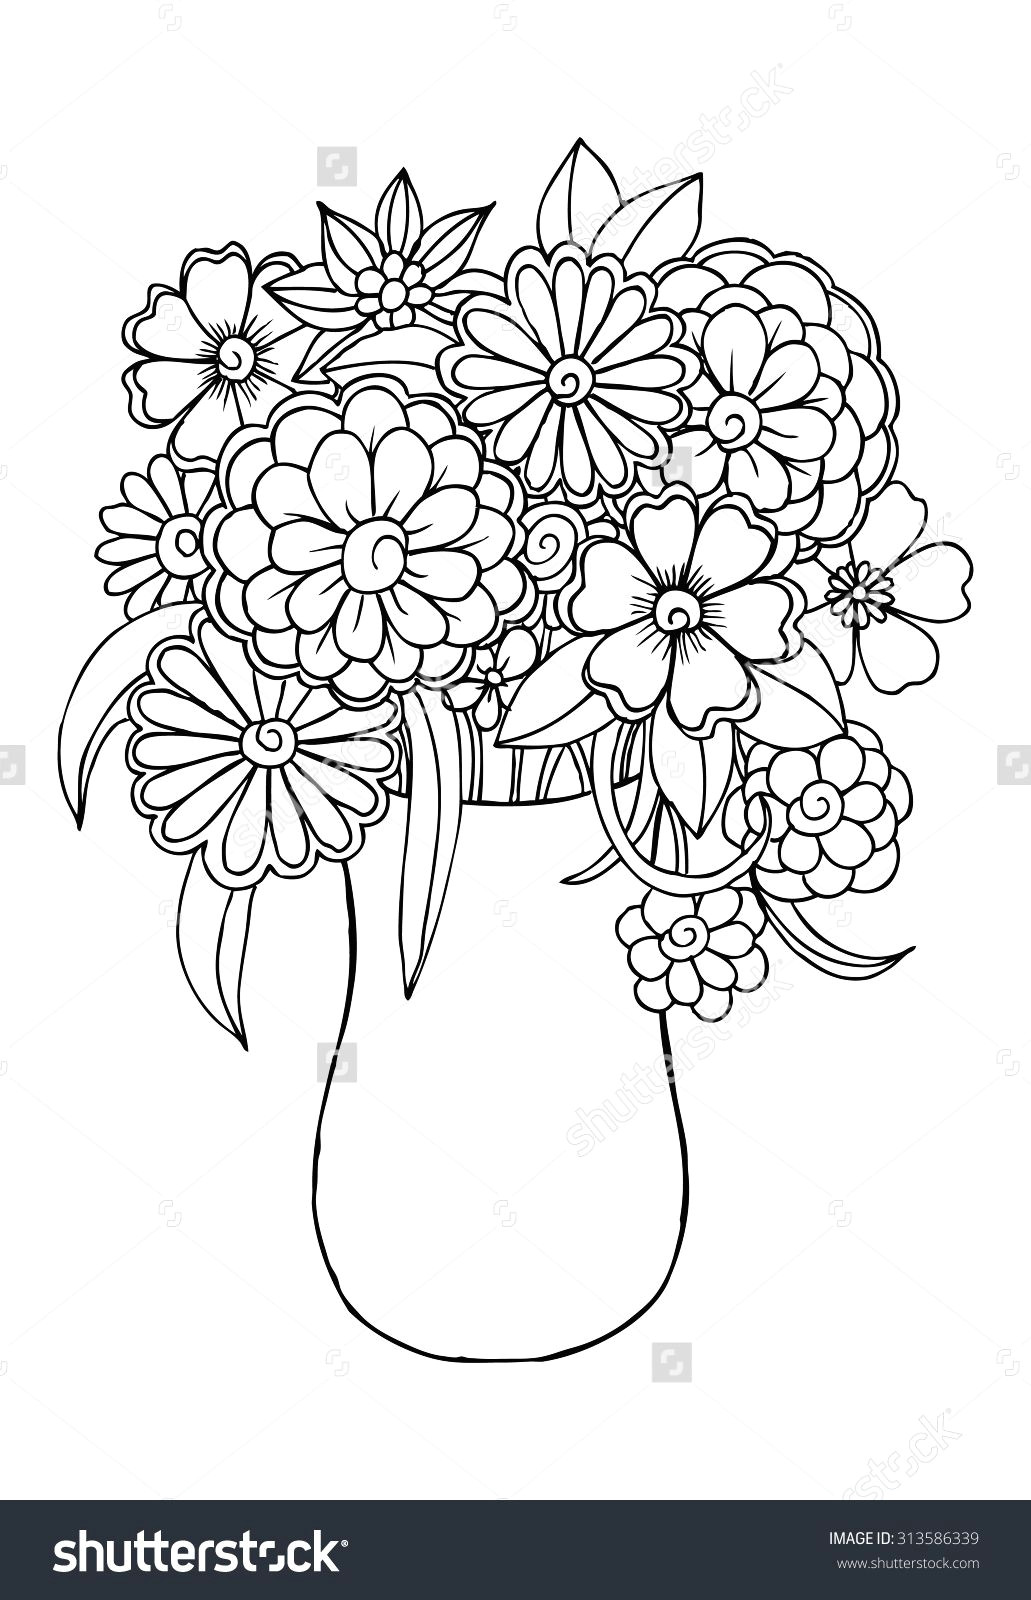 Drawings Of Bunch Of Roses Vector Bouquet Of Flowers In A Vase Art Draw Flowers and Plants